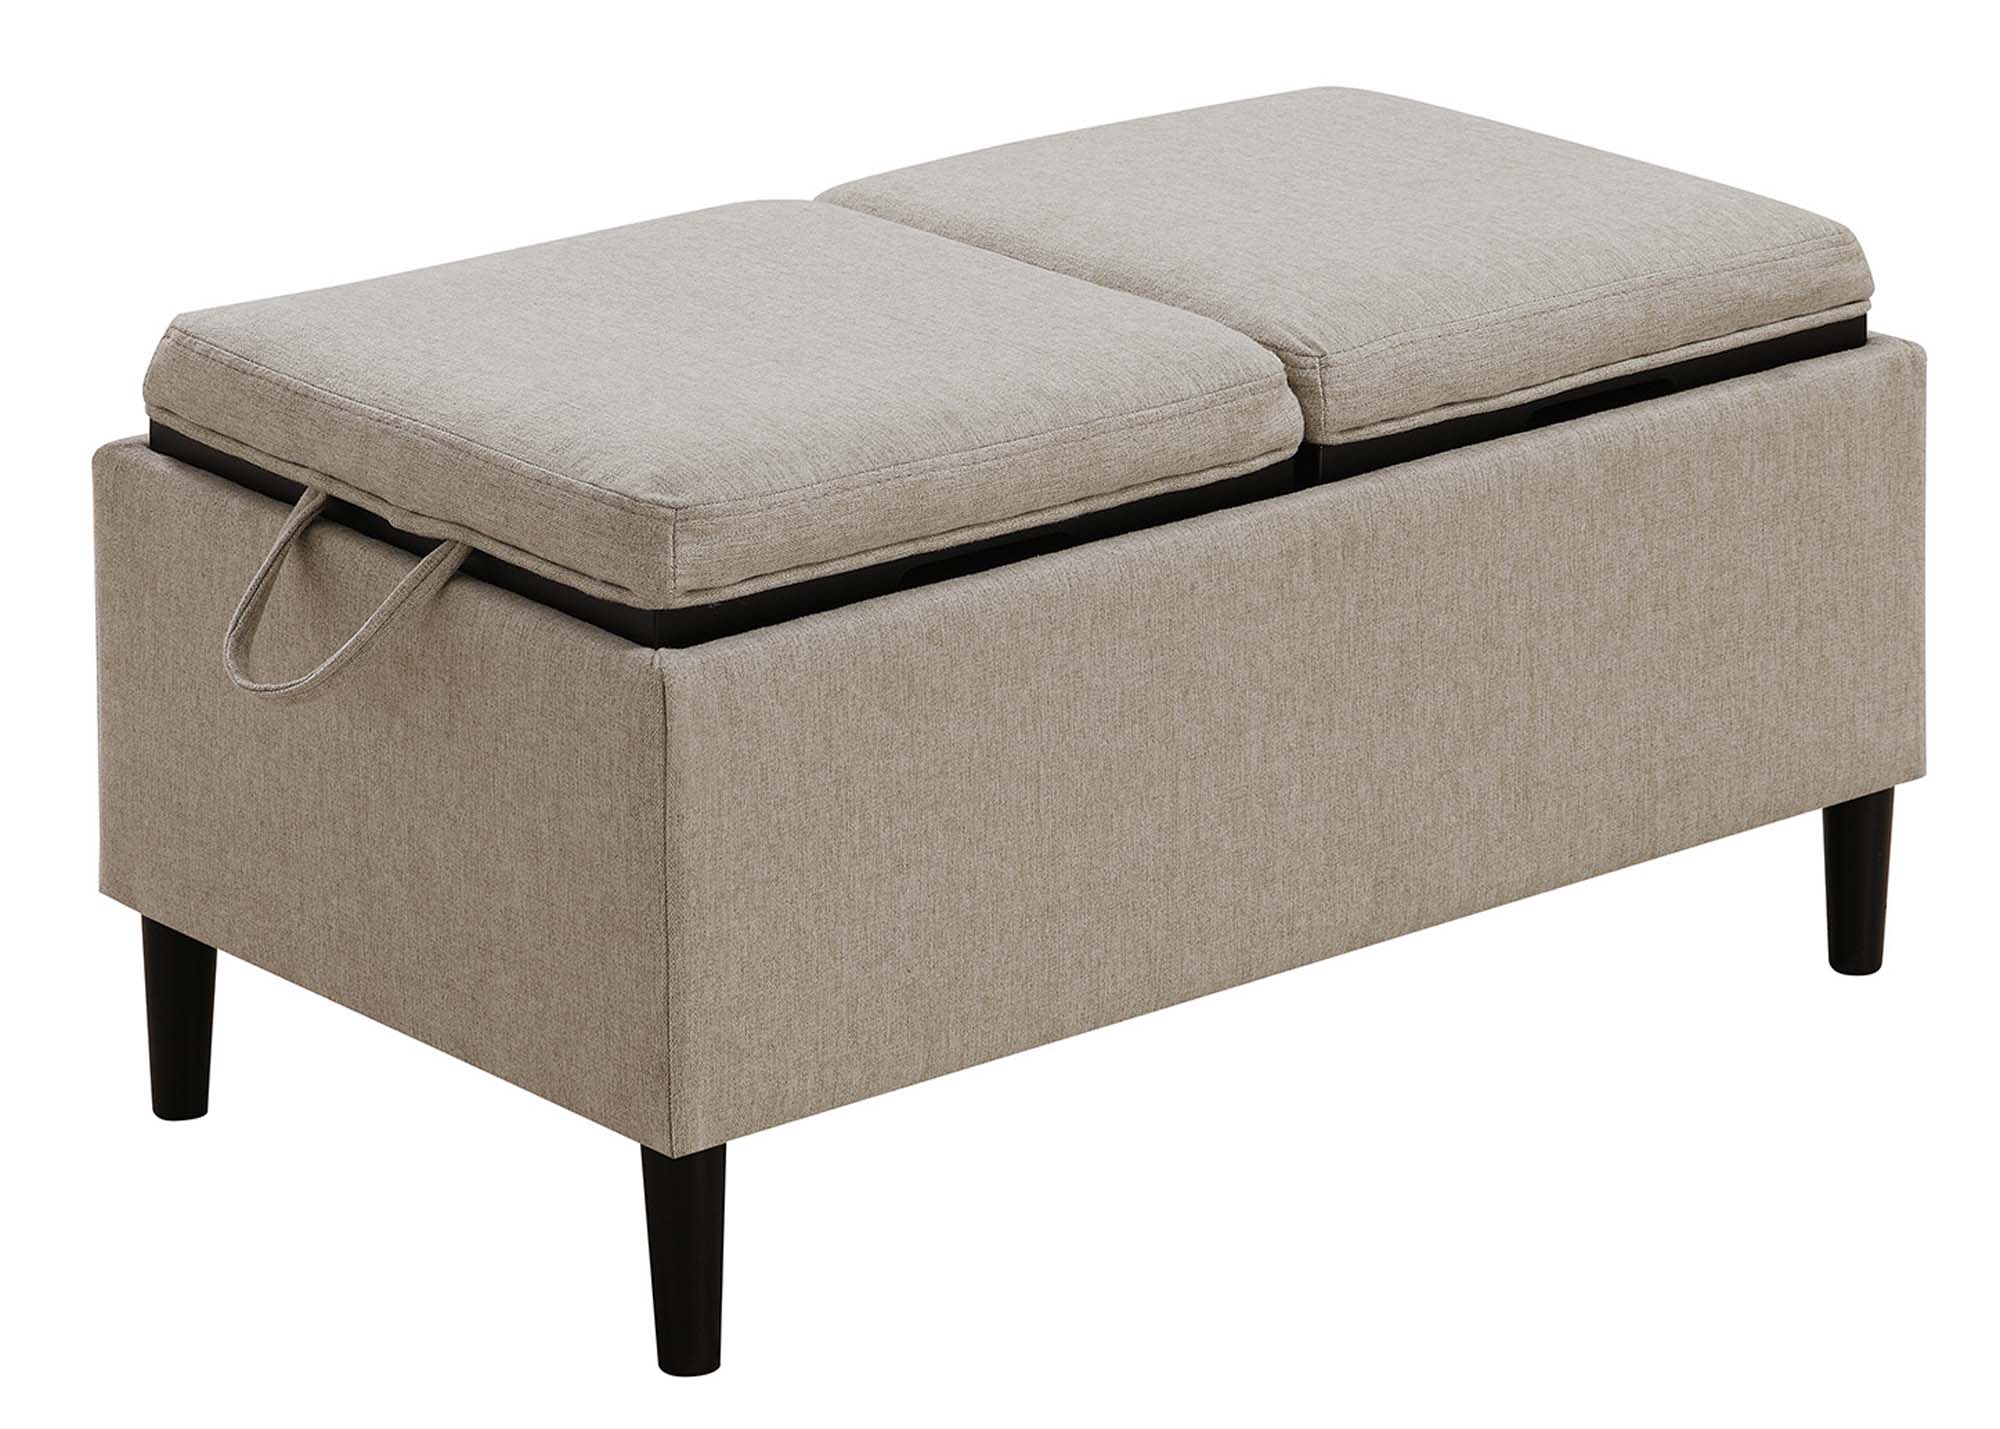 Convenience Concepts Designs4Comfort Magnolia Storage Ottoman with Trays - image 4 of 4